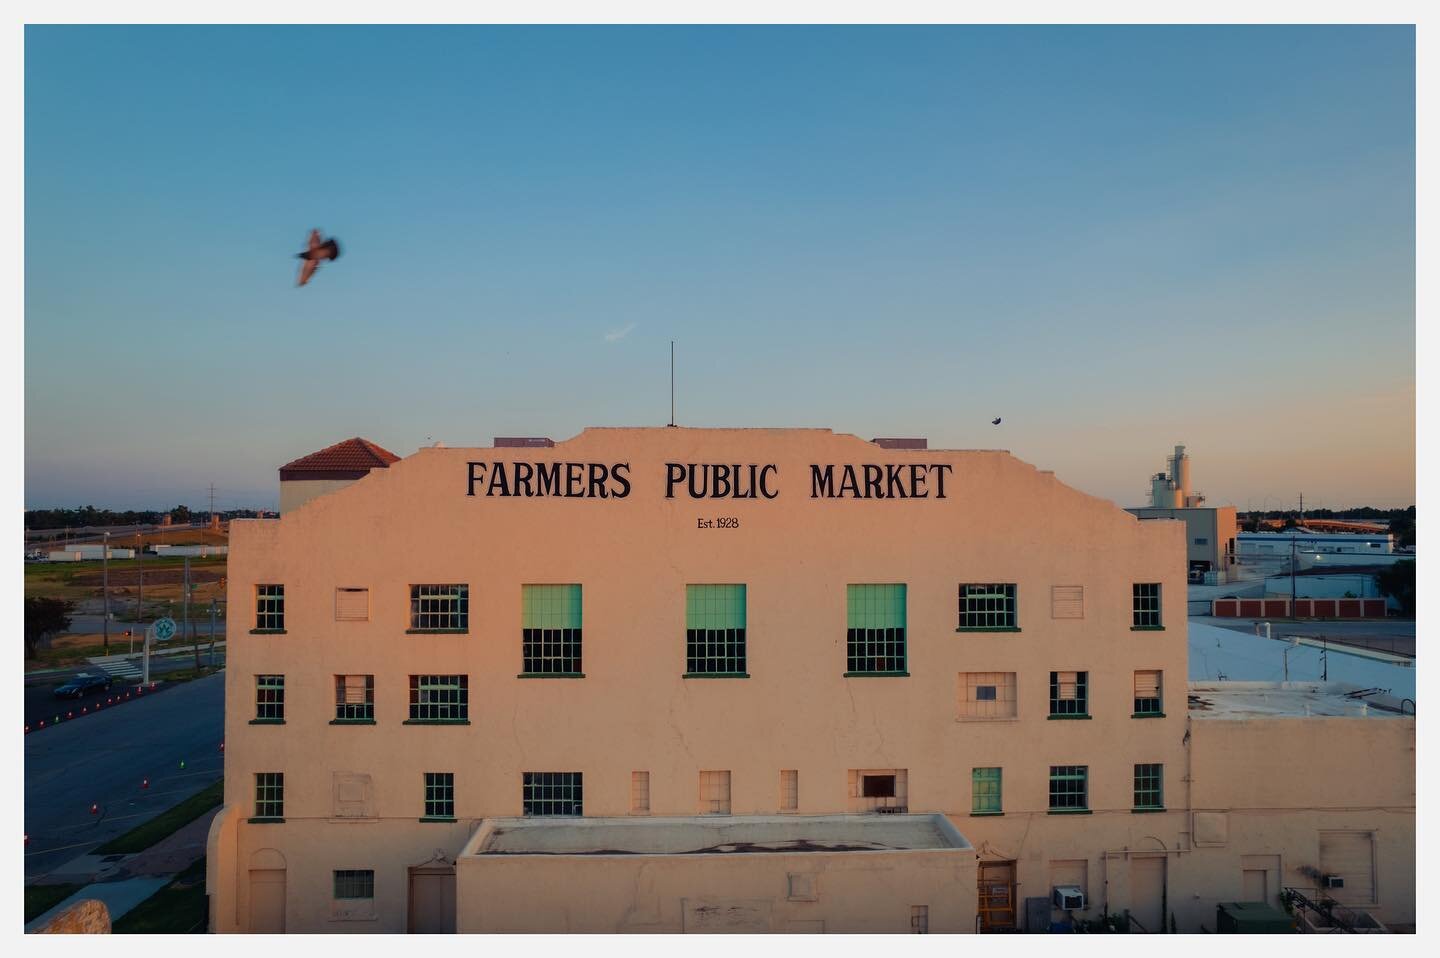 always in the market 🍎 🚁

#drone #dronephotography #okc #downtownokc #farmersmarket #sustainableliving